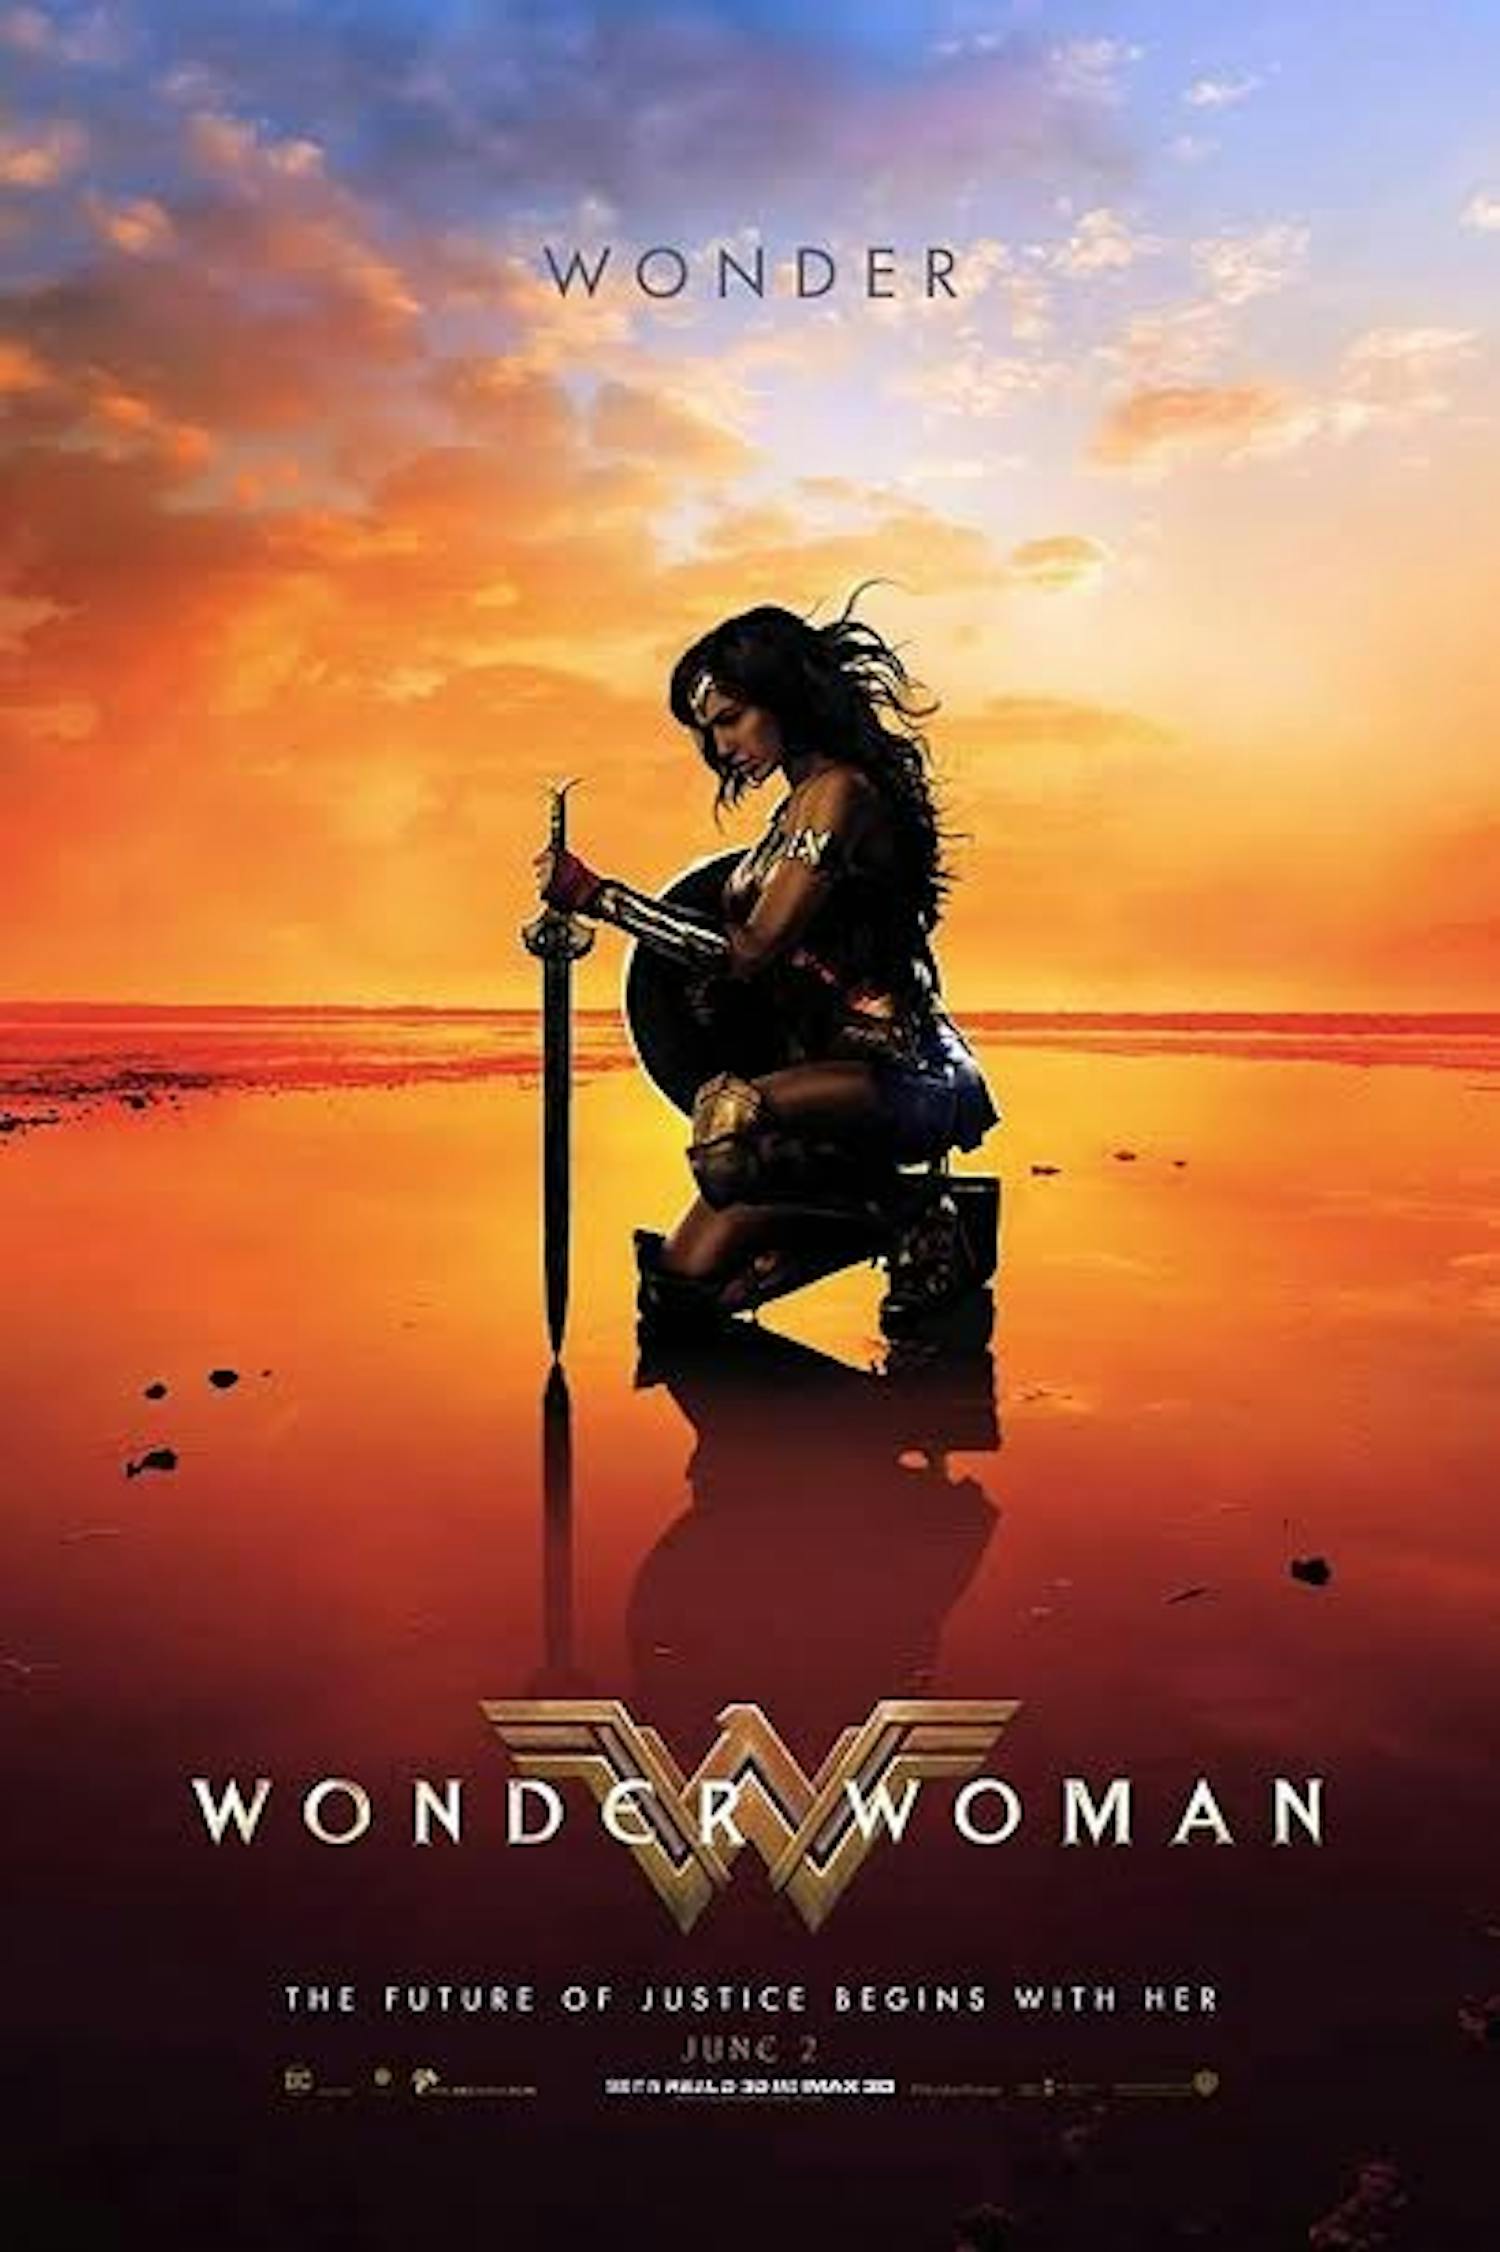 "Wonder Woman," starring Gal Gadot, was&nbsp;released on June 2, 2017. The film is DC's first successful entry into their cinematic universe, ditching the grim tone in favor of humor and heart.